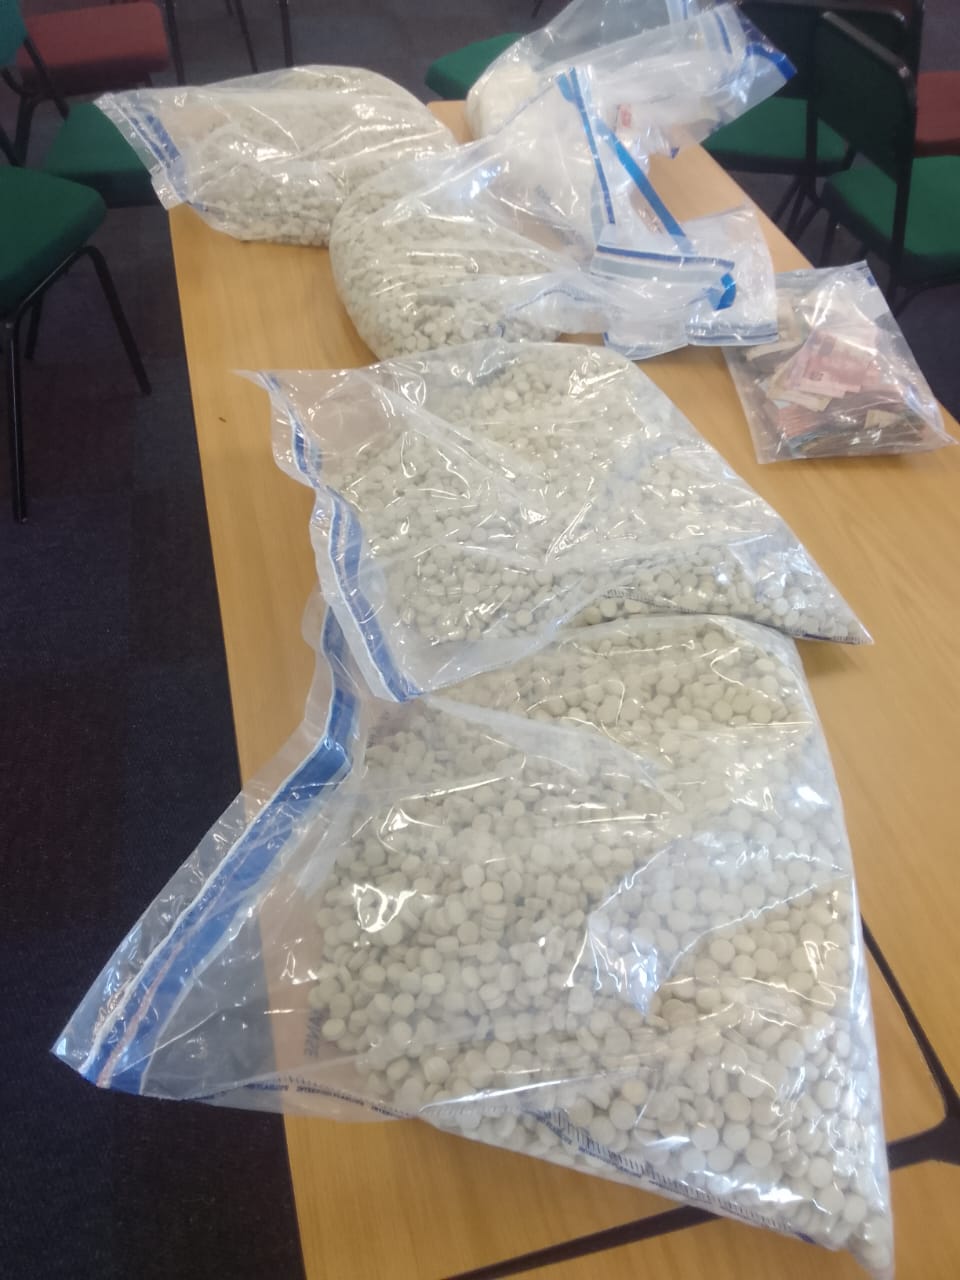 Suspect due in court for possession of illicit drugs worth R1.29 million